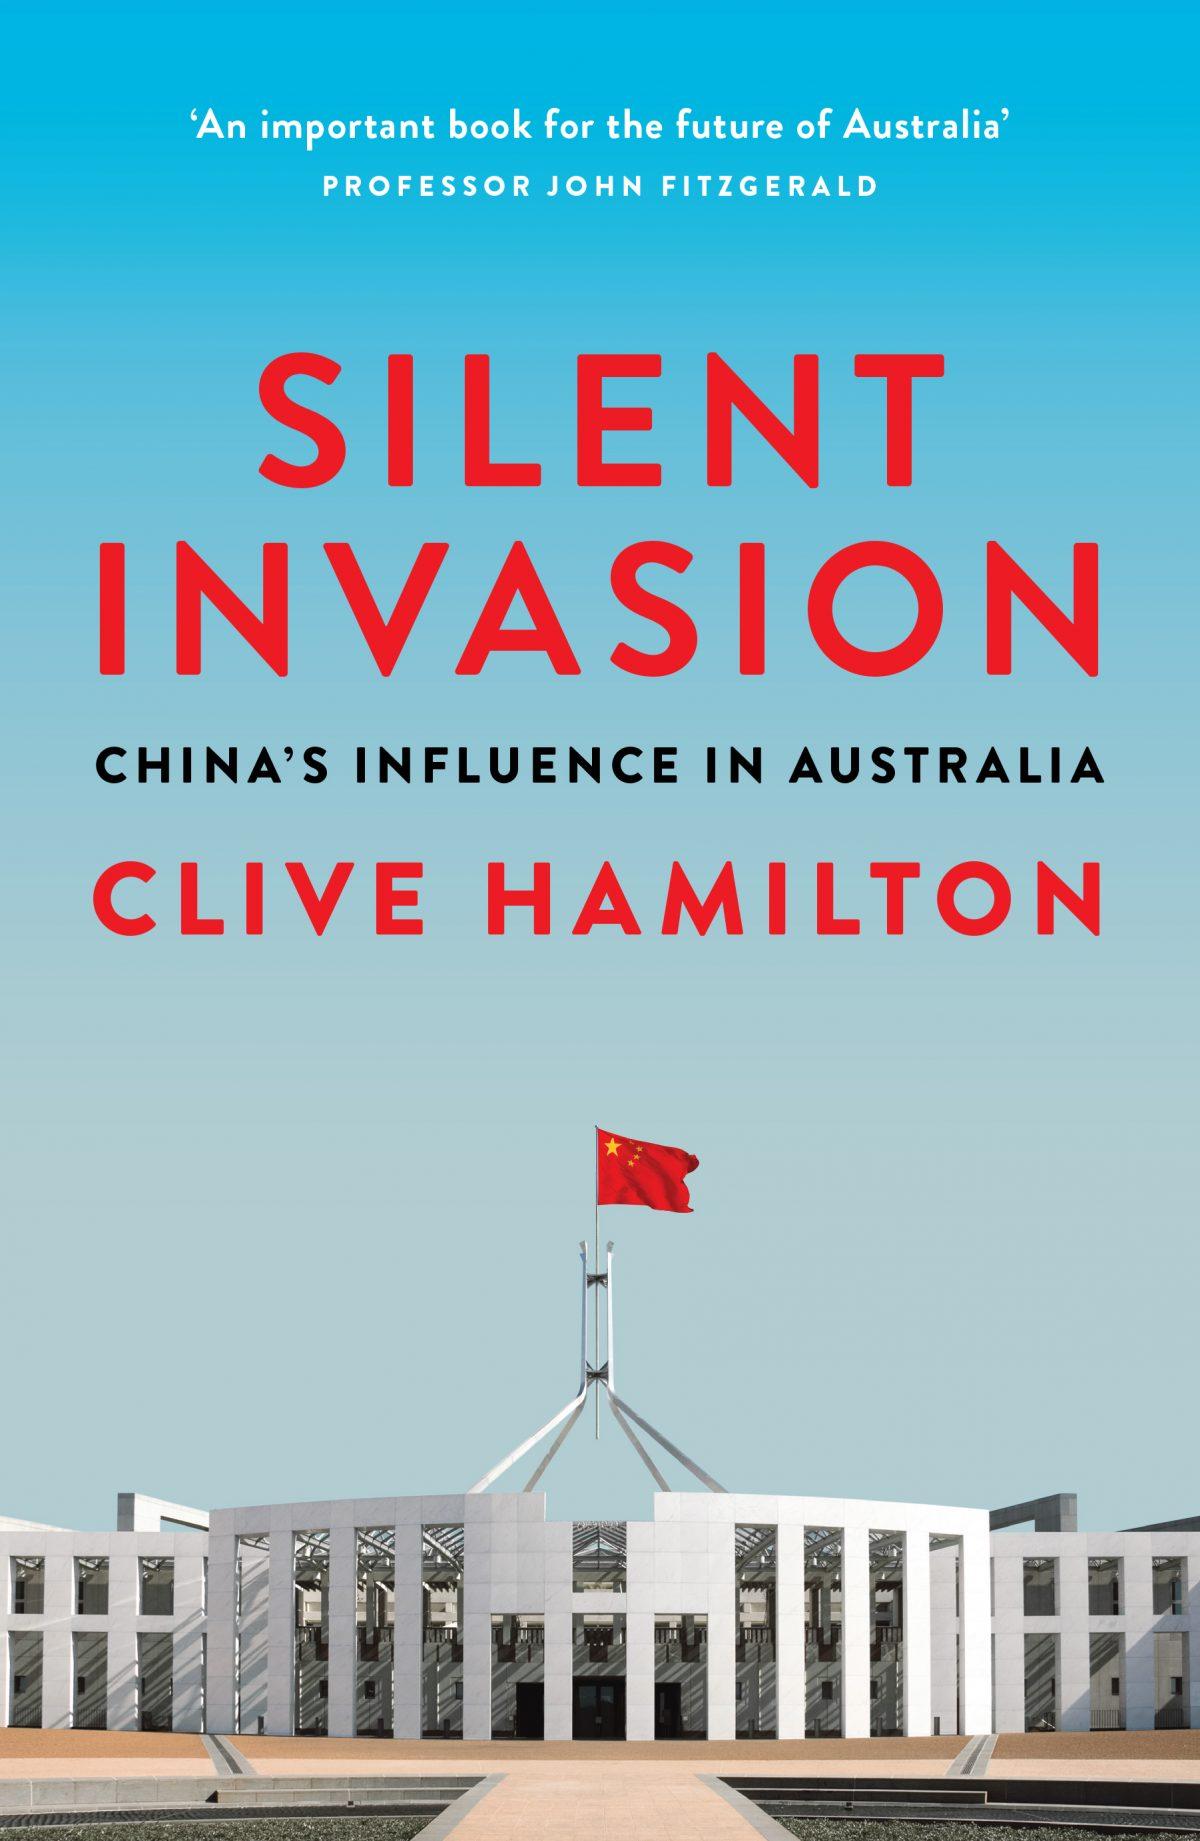 Book cover of Clive Hamilton's "Silent Invasion." (Hardie Grant Publishing)